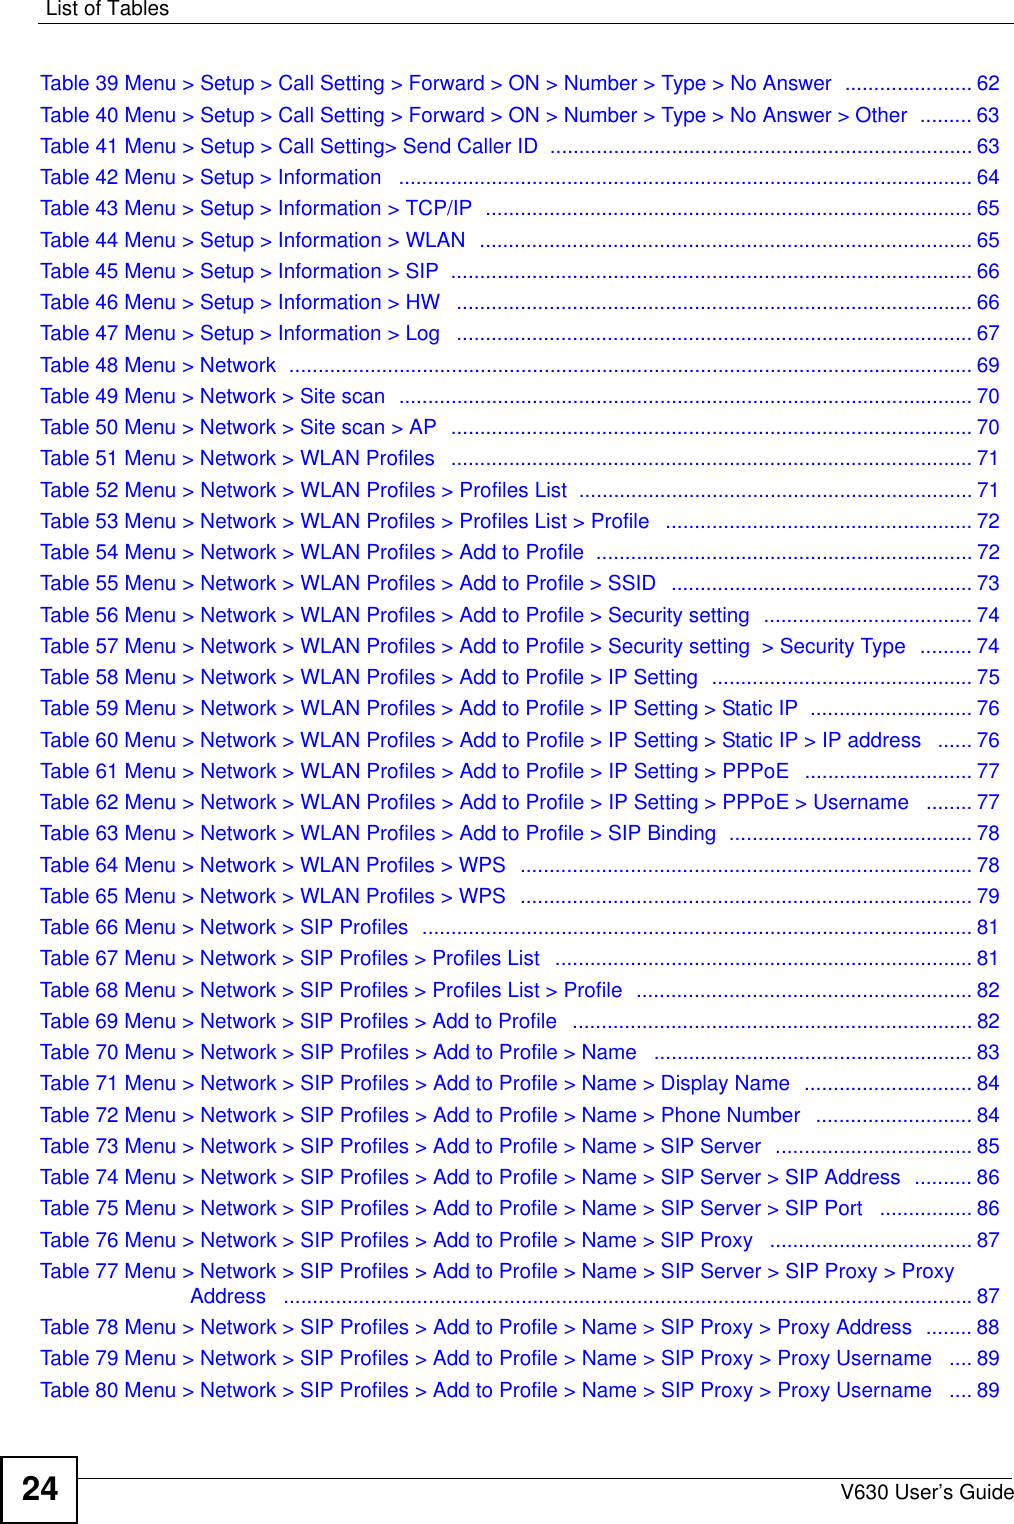 List of TablesV630 User’s Guide24Table 39 Menu &gt; Setup &gt; Call Setting &gt; Forward &gt; ON &gt; Number &gt; Type &gt; No Answer  ...................... 62Table 40 Menu &gt; Setup &gt; Call Setting &gt; Forward &gt; ON &gt; Number &gt; Type &gt; No Answer &gt; Other  ......... 63Table 41 Menu &gt; Setup &gt; Call Setting&gt; Send Caller ID  ......................................................................... 63Table 42 Menu &gt; Setup &gt; Information   ................................................................................................... 64Table 43 Menu &gt; Setup &gt; Information &gt; TCP/IP  .................................................................................... 65Table 44 Menu &gt; Setup &gt; Information &gt; WLAN  ..................................................................................... 65Table 45 Menu &gt; Setup &gt; Information &gt; SIP  .......................................................................................... 66Table 46 Menu &gt; Setup &gt; Information &gt; HW   ......................................................................................... 66Table 47 Menu &gt; Setup &gt; Information &gt; Log   ......................................................................................... 67Table 48 Menu &gt; Network  ...................................................................................................................... 69Table 49 Menu &gt; Network &gt; Site scan  ................................................................................................... 70Table 50 Menu &gt; Network &gt; Site scan &gt; AP  .......................................................................................... 70Table 51 Menu &gt; Network &gt; WLAN Profiles   .......................................................................................... 71Table 52 Menu &gt; Network &gt; WLAN Profiles &gt; Profiles List  .................................................................... 71Table 53 Menu &gt; Network &gt; WLAN Profiles &gt; Profiles List &gt; Profile   ..................................................... 72Table 54 Menu &gt; Network &gt; WLAN Profiles &gt; Add to Profile  ................................................................. 72Table 55 Menu &gt; Network &gt; WLAN Profiles &gt; Add to Profile &gt; SSID   .................................................... 73Table 56 Menu &gt; Network &gt; WLAN Profiles &gt; Add to Profile &gt; Security setting  .................................... 74Table 57 Menu &gt; Network &gt; WLAN Profiles &gt; Add to Profile &gt; Security setting  &gt; Security Type  ......... 74Table 58 Menu &gt; Network &gt; WLAN Profiles &gt; Add to Profile &gt; IP Setting  ............................................. 75Table 59 Menu &gt; Network &gt; WLAN Profiles &gt; Add to Profile &gt; IP Setting &gt; Static IP  ............................ 76Table 60 Menu &gt; Network &gt; WLAN Profiles &gt; Add to Profile &gt; IP Setting &gt; Static IP &gt; IP address   ...... 76Table 61 Menu &gt; Network &gt; WLAN Profiles &gt; Add to Profile &gt; IP Setting &gt; PPPoE   ............................. 77Table 62 Menu &gt; Network &gt; WLAN Profiles &gt; Add to Profile &gt; IP Setting &gt; PPPoE &gt; Username   ........ 77Table 63 Menu &gt; Network &gt; WLAN Profiles &gt; Add to Profile &gt; SIP Binding  .......................................... 78Table 64 Menu &gt; Network &gt; WLAN Profiles &gt; WPS  .............................................................................. 78Table 65 Menu &gt; Network &gt; WLAN Profiles &gt; WPS  .............................................................................. 79Table 66 Menu &gt; Network &gt; SIP Profiles  ............................................................................................... 81Table 67 Menu &gt; Network &gt; SIP Profiles &gt; Profiles List   ........................................................................81Table 68 Menu &gt; Network &gt; SIP Profiles &gt; Profiles List &gt; Profile  .......................................................... 82Table 69 Menu &gt; Network &gt; SIP Profiles &gt; Add to Profile   ..................................................................... 82Table 70 Menu &gt; Network &gt; SIP Profiles &gt; Add to Profile &gt; Name   ....................................................... 83Table 71 Menu &gt; Network &gt; SIP Profiles &gt; Add to Profile &gt; Name &gt; Display Name  ............................. 84Table 72 Menu &gt; Network &gt; SIP Profiles &gt; Add to Profile &gt; Name &gt; Phone Number   ........................... 84Table 73 Menu &gt; Network &gt; SIP Profiles &gt; Add to Profile &gt; Name &gt; SIP Server  .................................. 85Table 74 Menu &gt; Network &gt; SIP Profiles &gt; Add to Profile &gt; Name &gt; SIP Server &gt; SIP Address  .......... 86Table 75 Menu &gt; Network &gt; SIP Profiles &gt; Add to Profile &gt; Name &gt; SIP Server &gt; SIP Port   ................ 86Table 76 Menu &gt; Network &gt; SIP Profiles &gt; Add to Profile &gt; Name &gt; SIP Proxy   ................................... 87Table 77 Menu &gt; Network &gt; SIP Profiles &gt; Add to Profile &gt; Name &gt; SIP Server &gt; SIP Proxy &gt; Proxy Address   .......................................................................................................................87Table 78 Menu &gt; Network &gt; SIP Profiles &gt; Add to Profile &gt; Name &gt; SIP Proxy &gt; Proxy Address  ........ 88Table 79 Menu &gt; Network &gt; SIP Profiles &gt; Add to Profile &gt; Name &gt; SIP Proxy &gt; Proxy Username   .... 89Table 80 Menu &gt; Network &gt; SIP Profiles &gt; Add to Profile &gt; Name &gt; SIP Proxy &gt; Proxy Username   .... 89